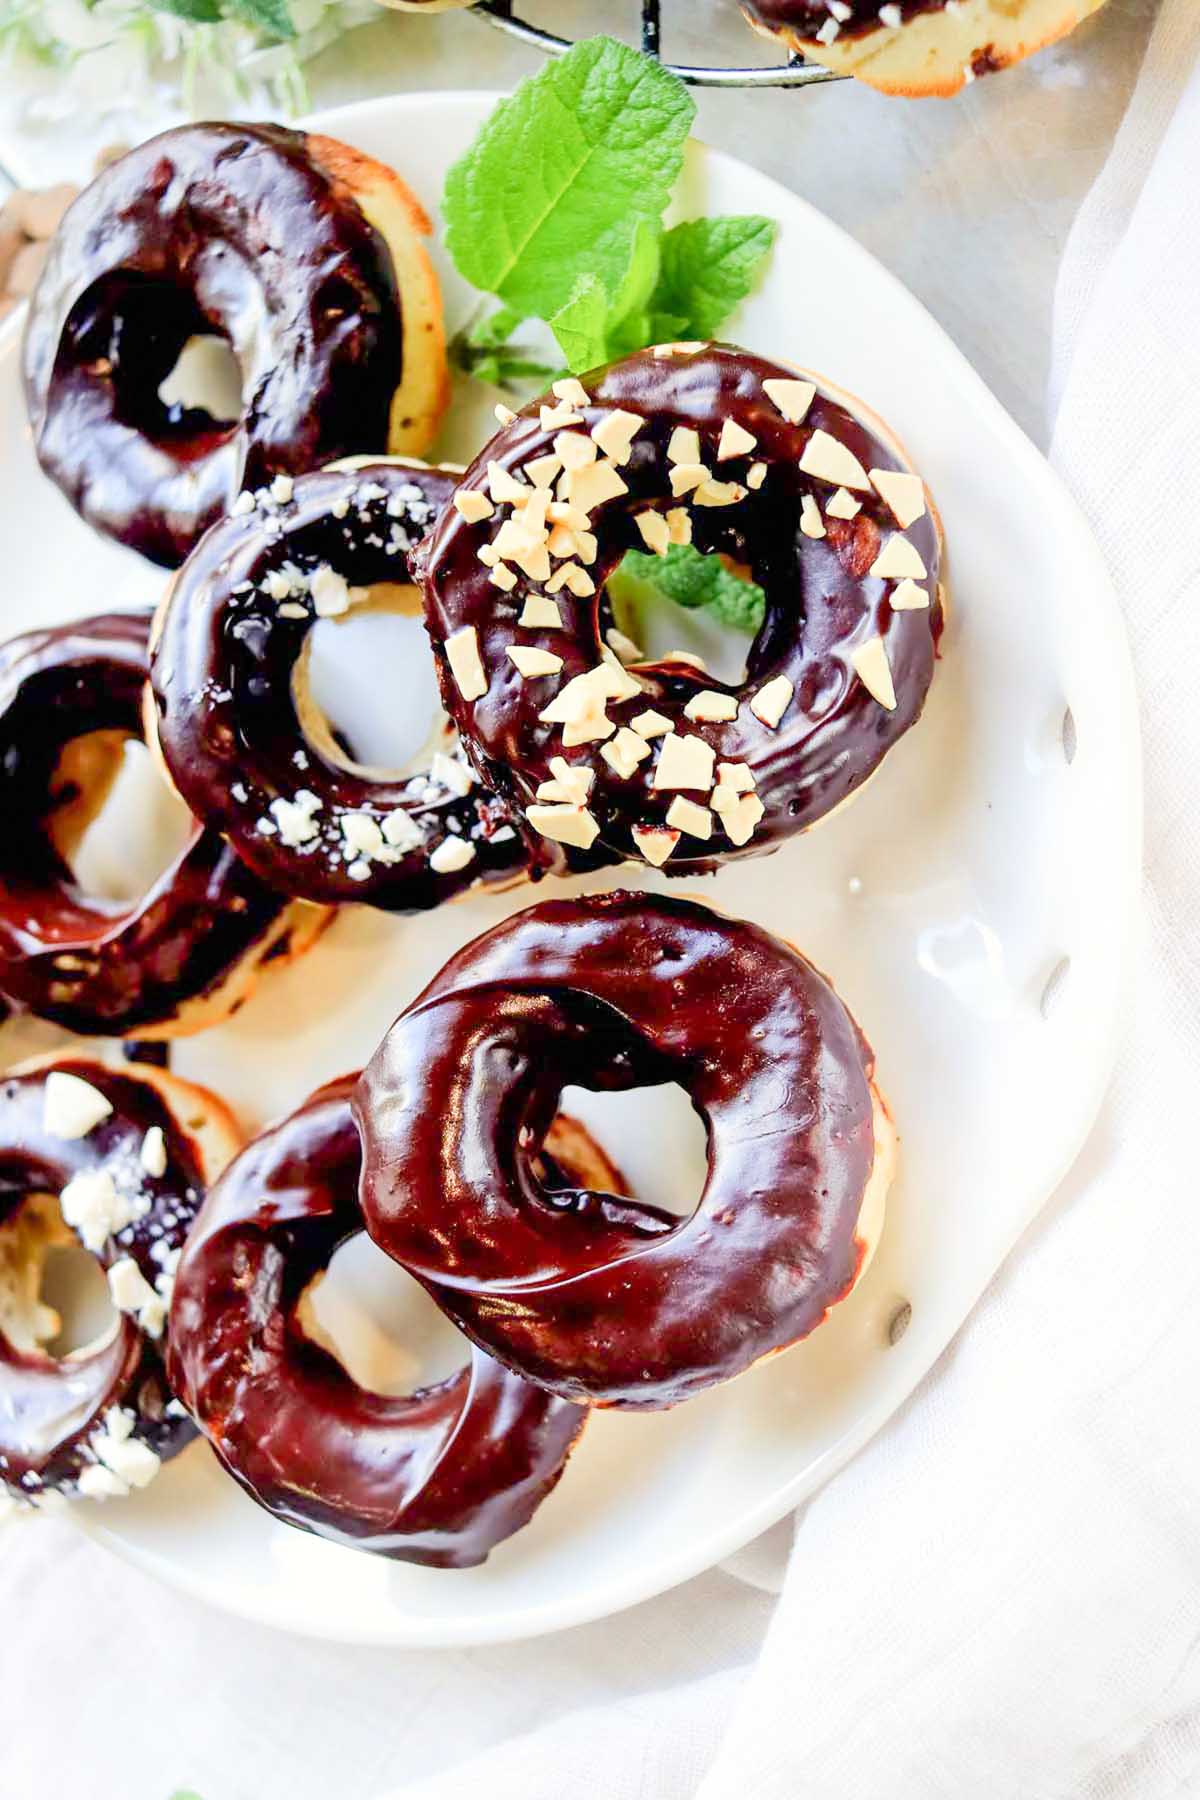 banana donuts frosted with chocolate and sprinkled with chopped nuts.